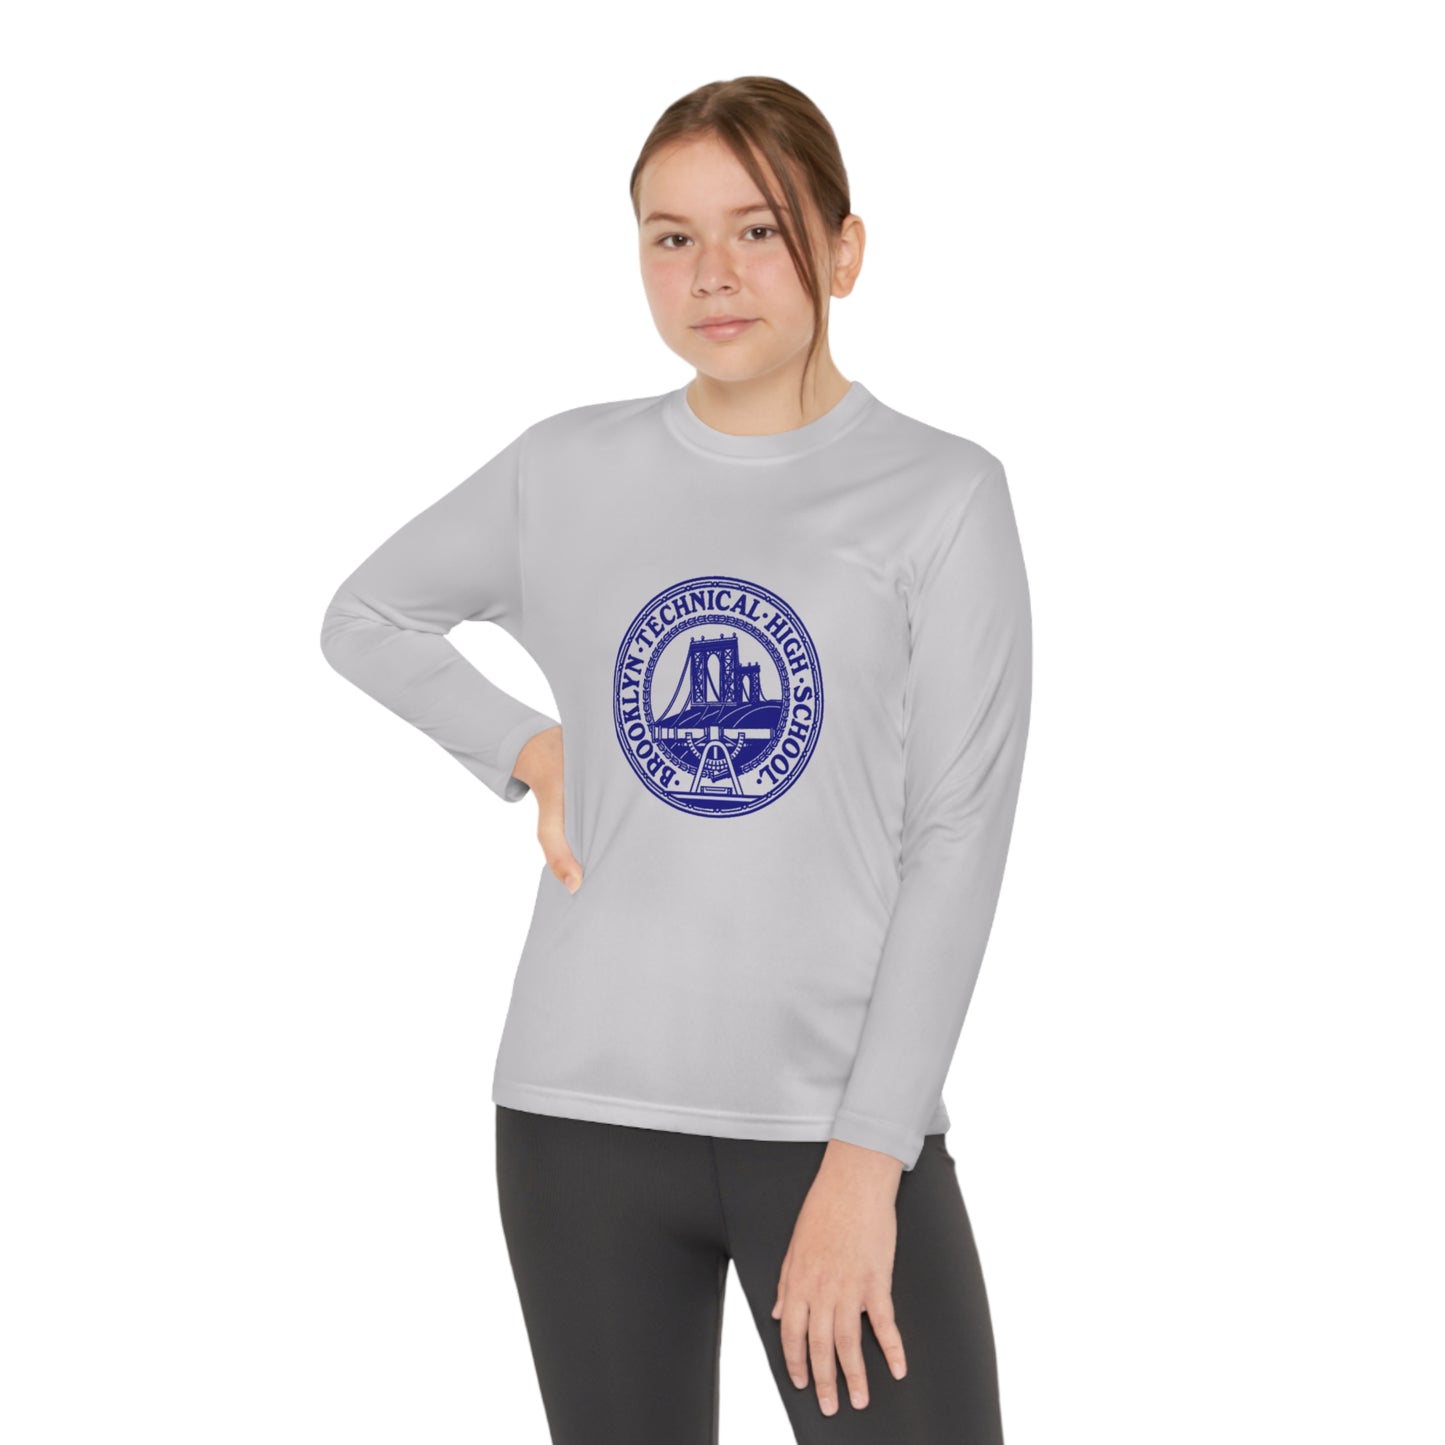 Family - Classic Tech Seal - Youth Long Sleeve Competitor T-Shirt